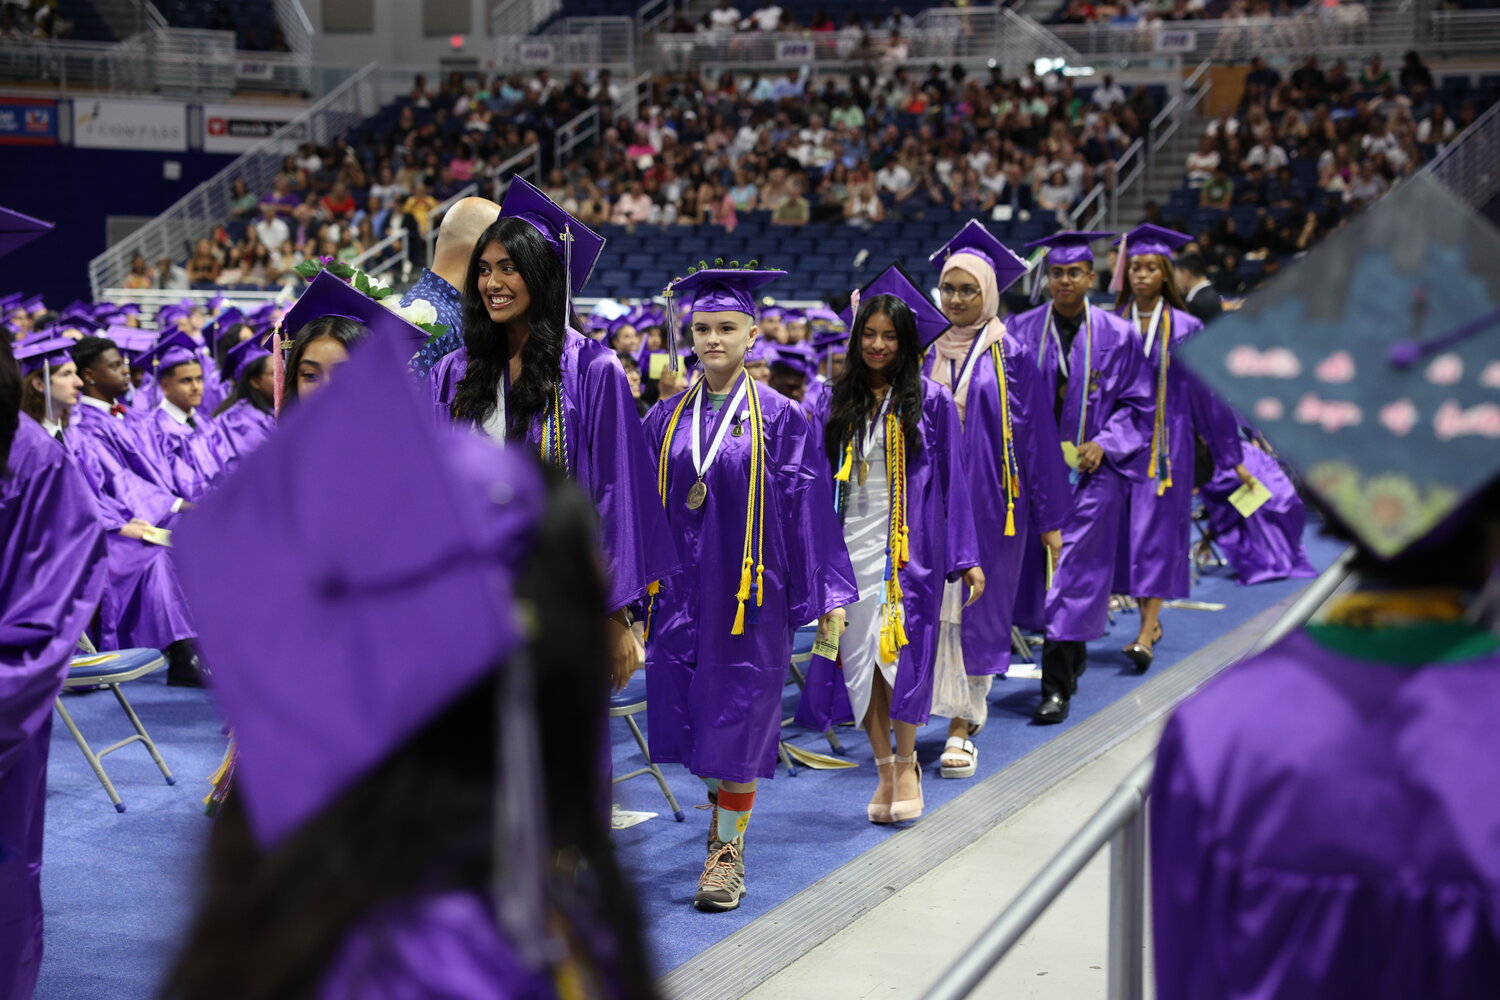 Students of Sewanhaka High School Class of 2023 marched toward their futures at their graduation this June. Current high school students are encouraged to think about their future and college applications at informational sessions hosted by the Franklin Square Public Library and Elmont Memorial Library.